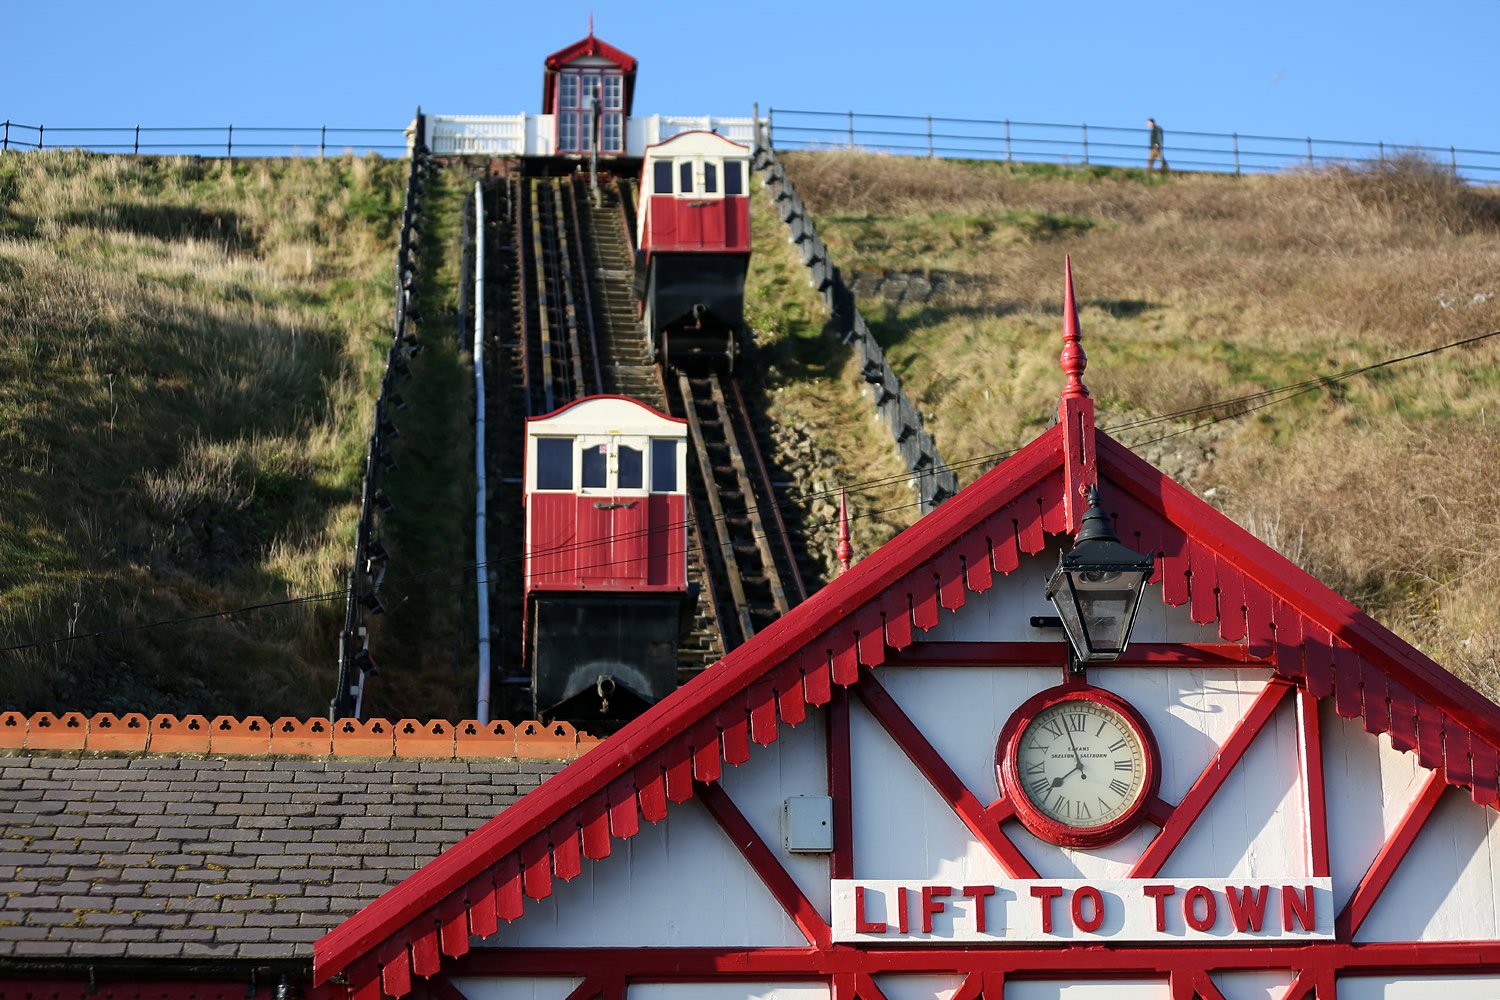 Image name Saltburn Cliff Tramway the 23 image from the post Visitor Attractions in Yorkshire.com.